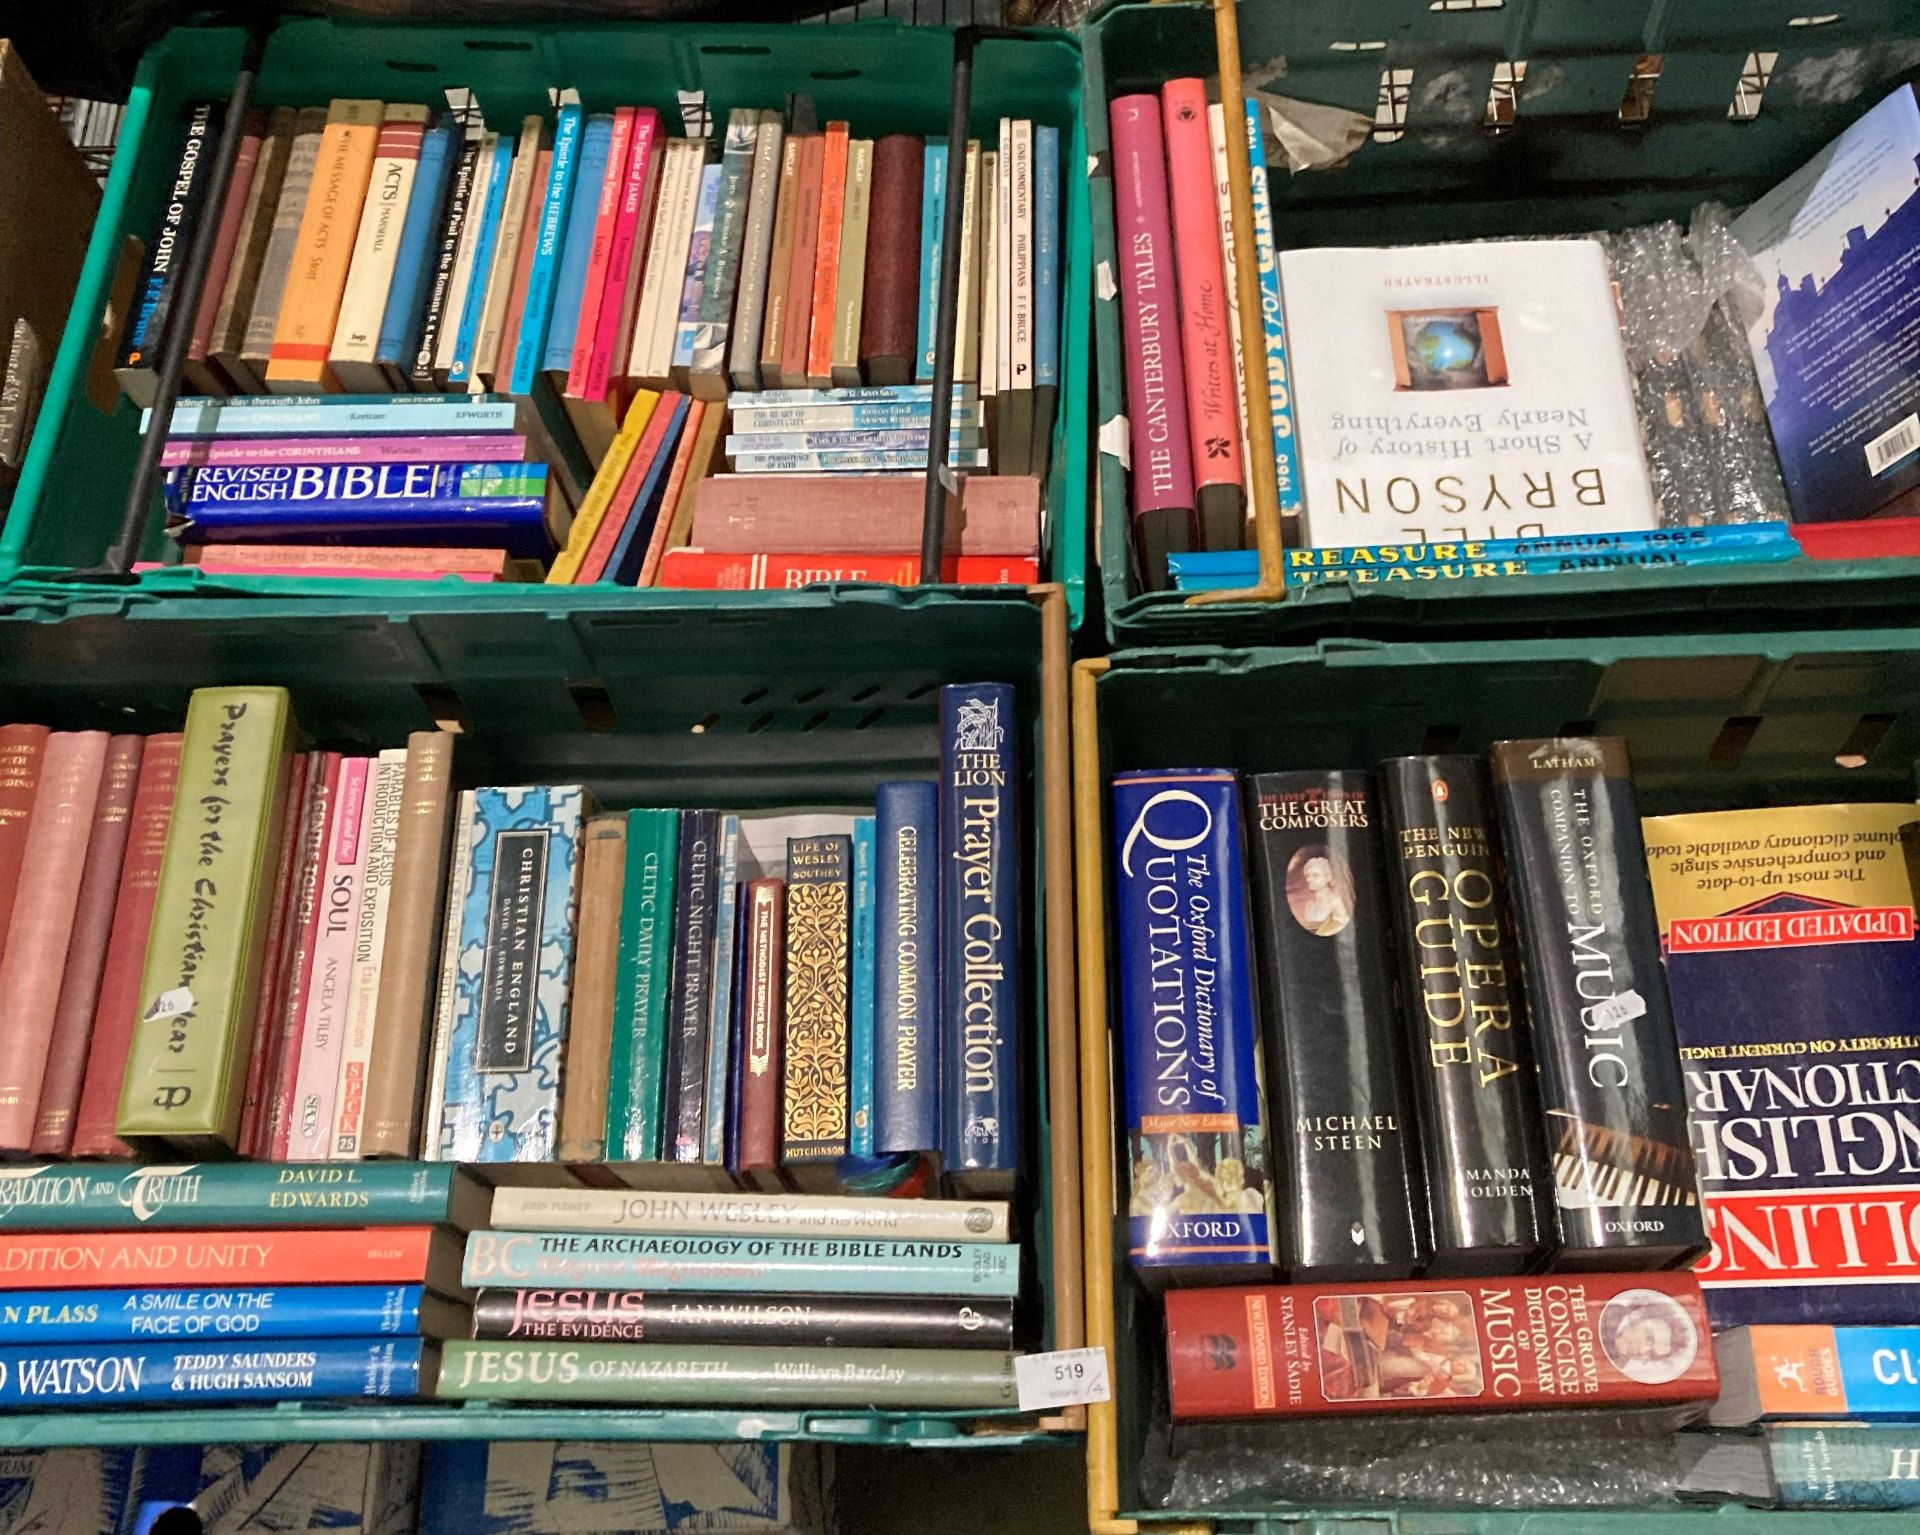 Contents to four boxes - books on religion, assorted dictionaries, etc.